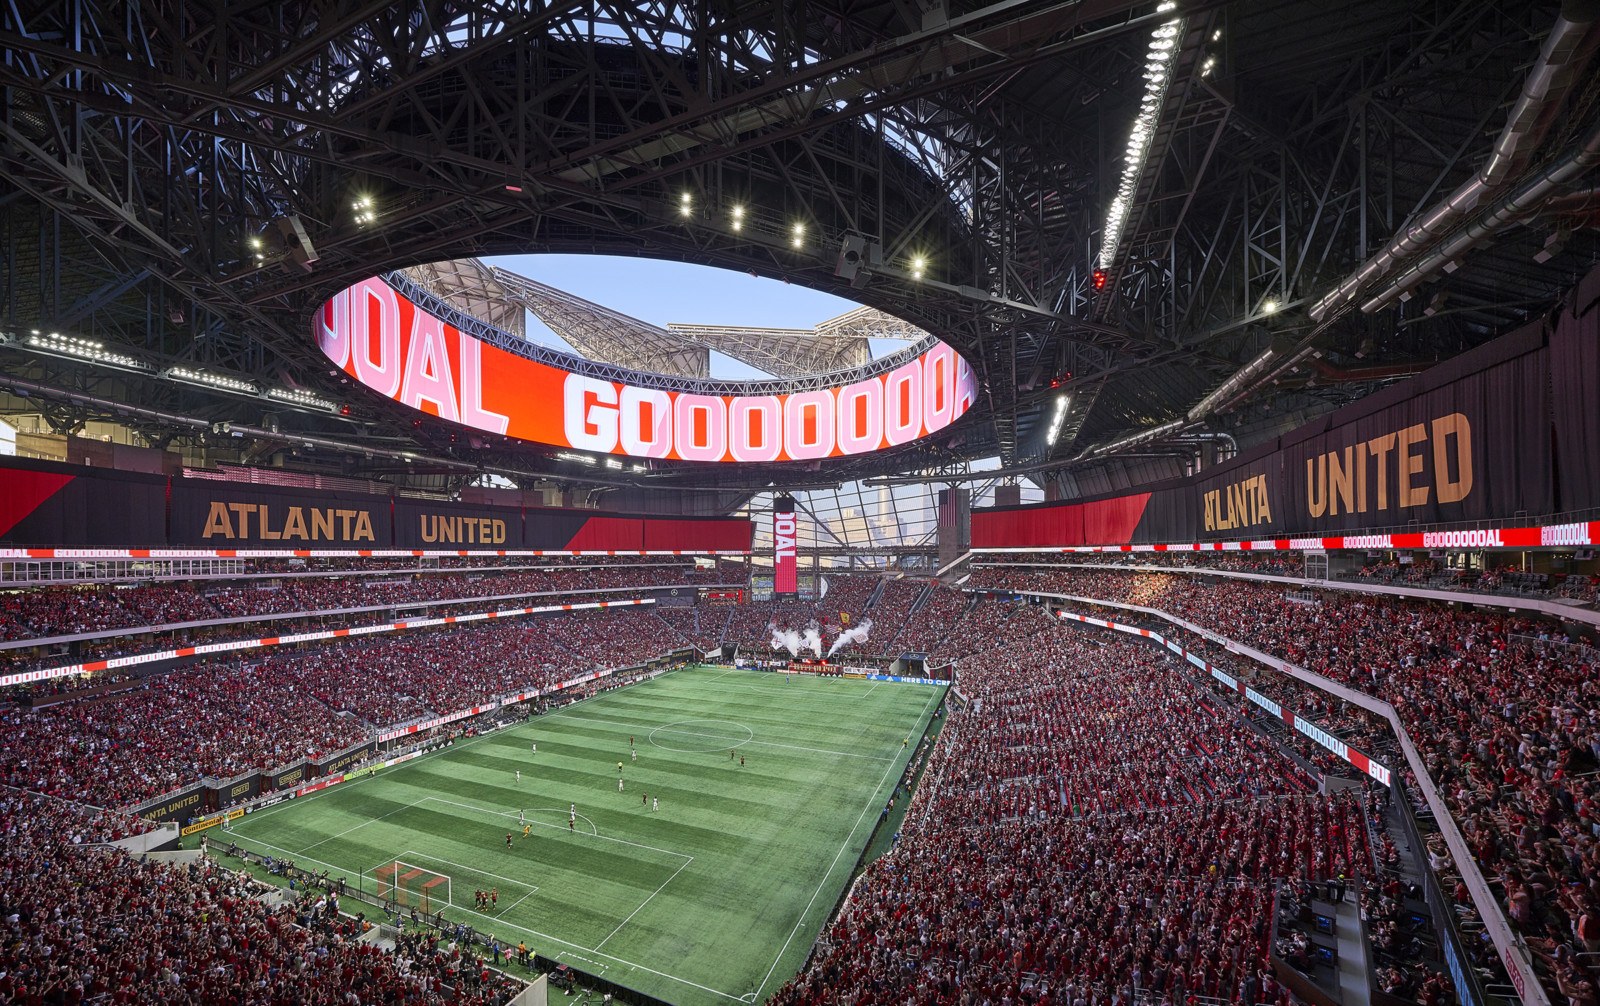 Architectural Digest Reviews Mercedes-Benz Stadium, “One of the Most  Beautifully Designed Stadiums on the Planet” - HOK